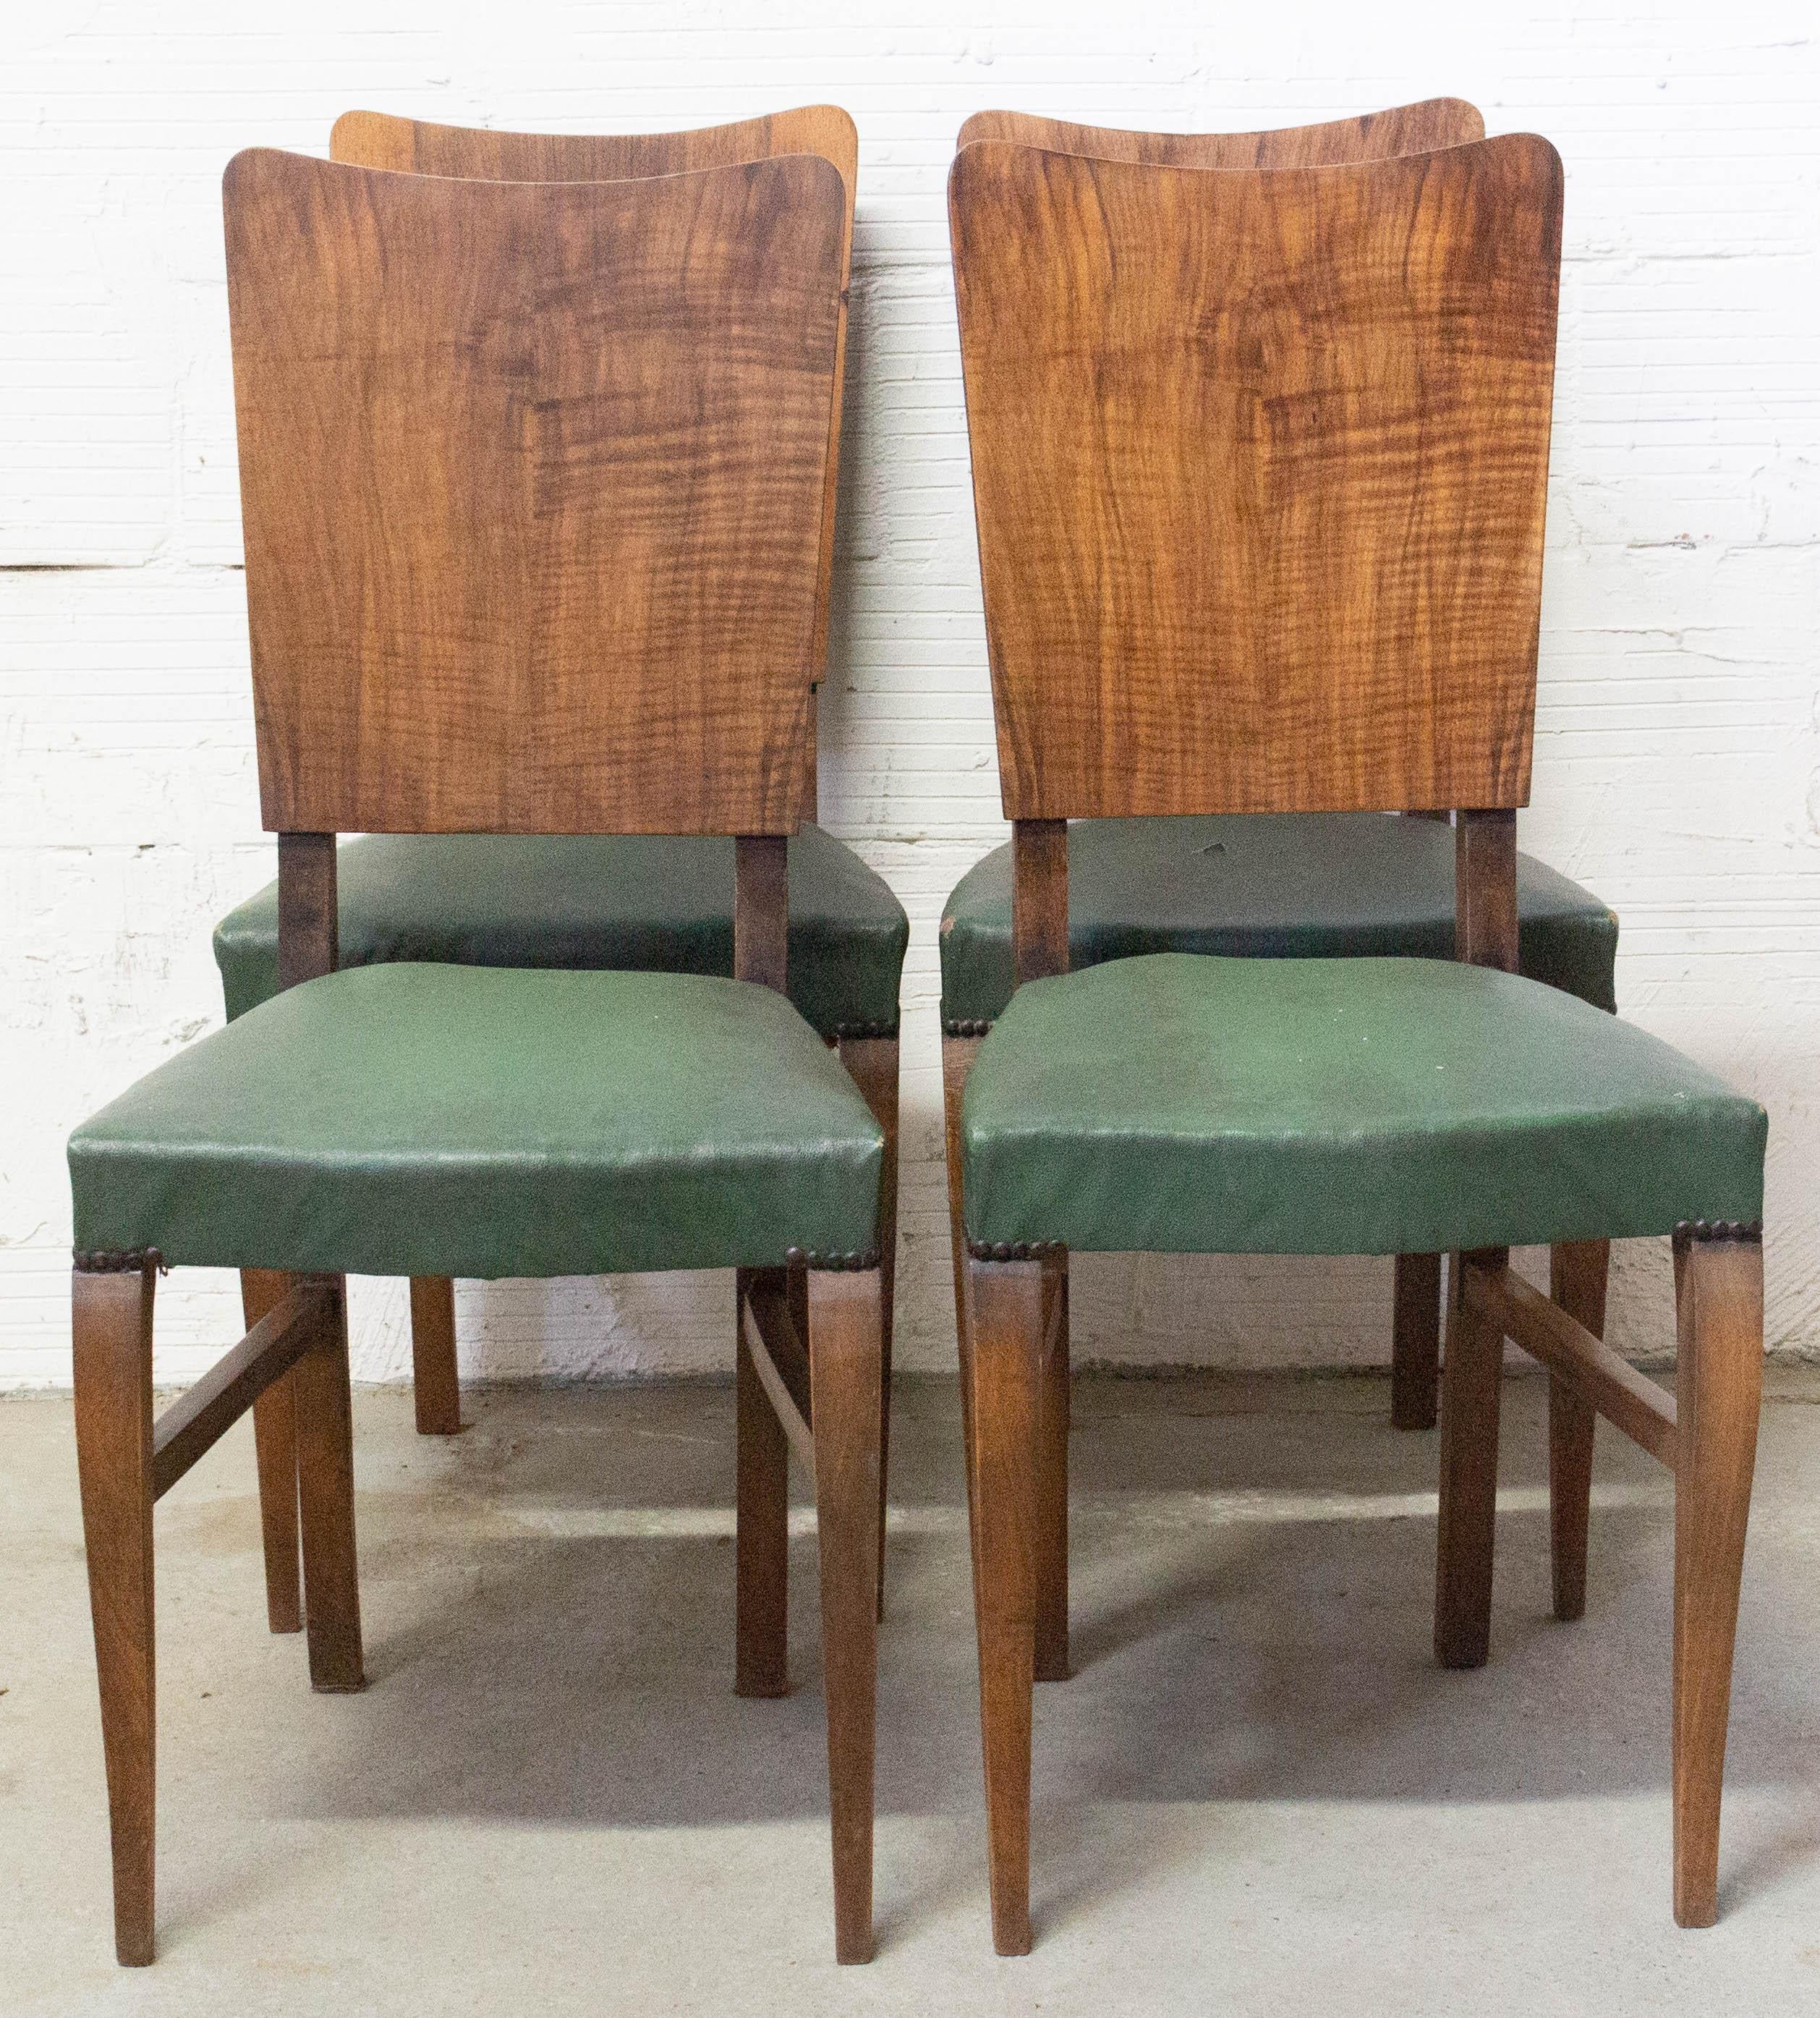 upholstered vintage chairs